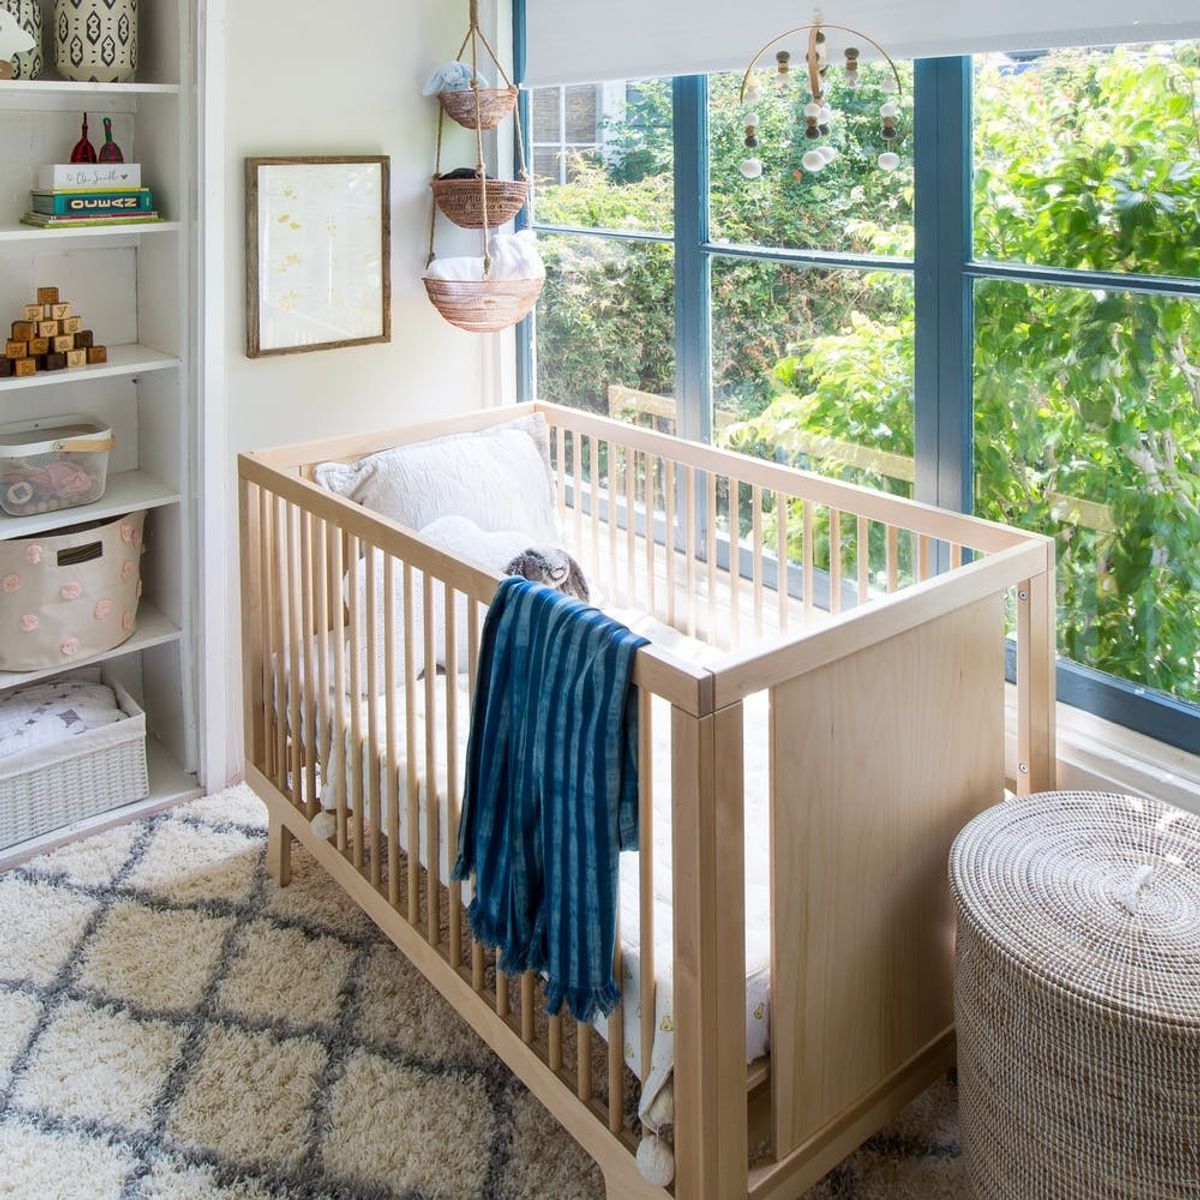 This Blogger’s Nursery Fits Serene Vibes into Just 140 Square Feet